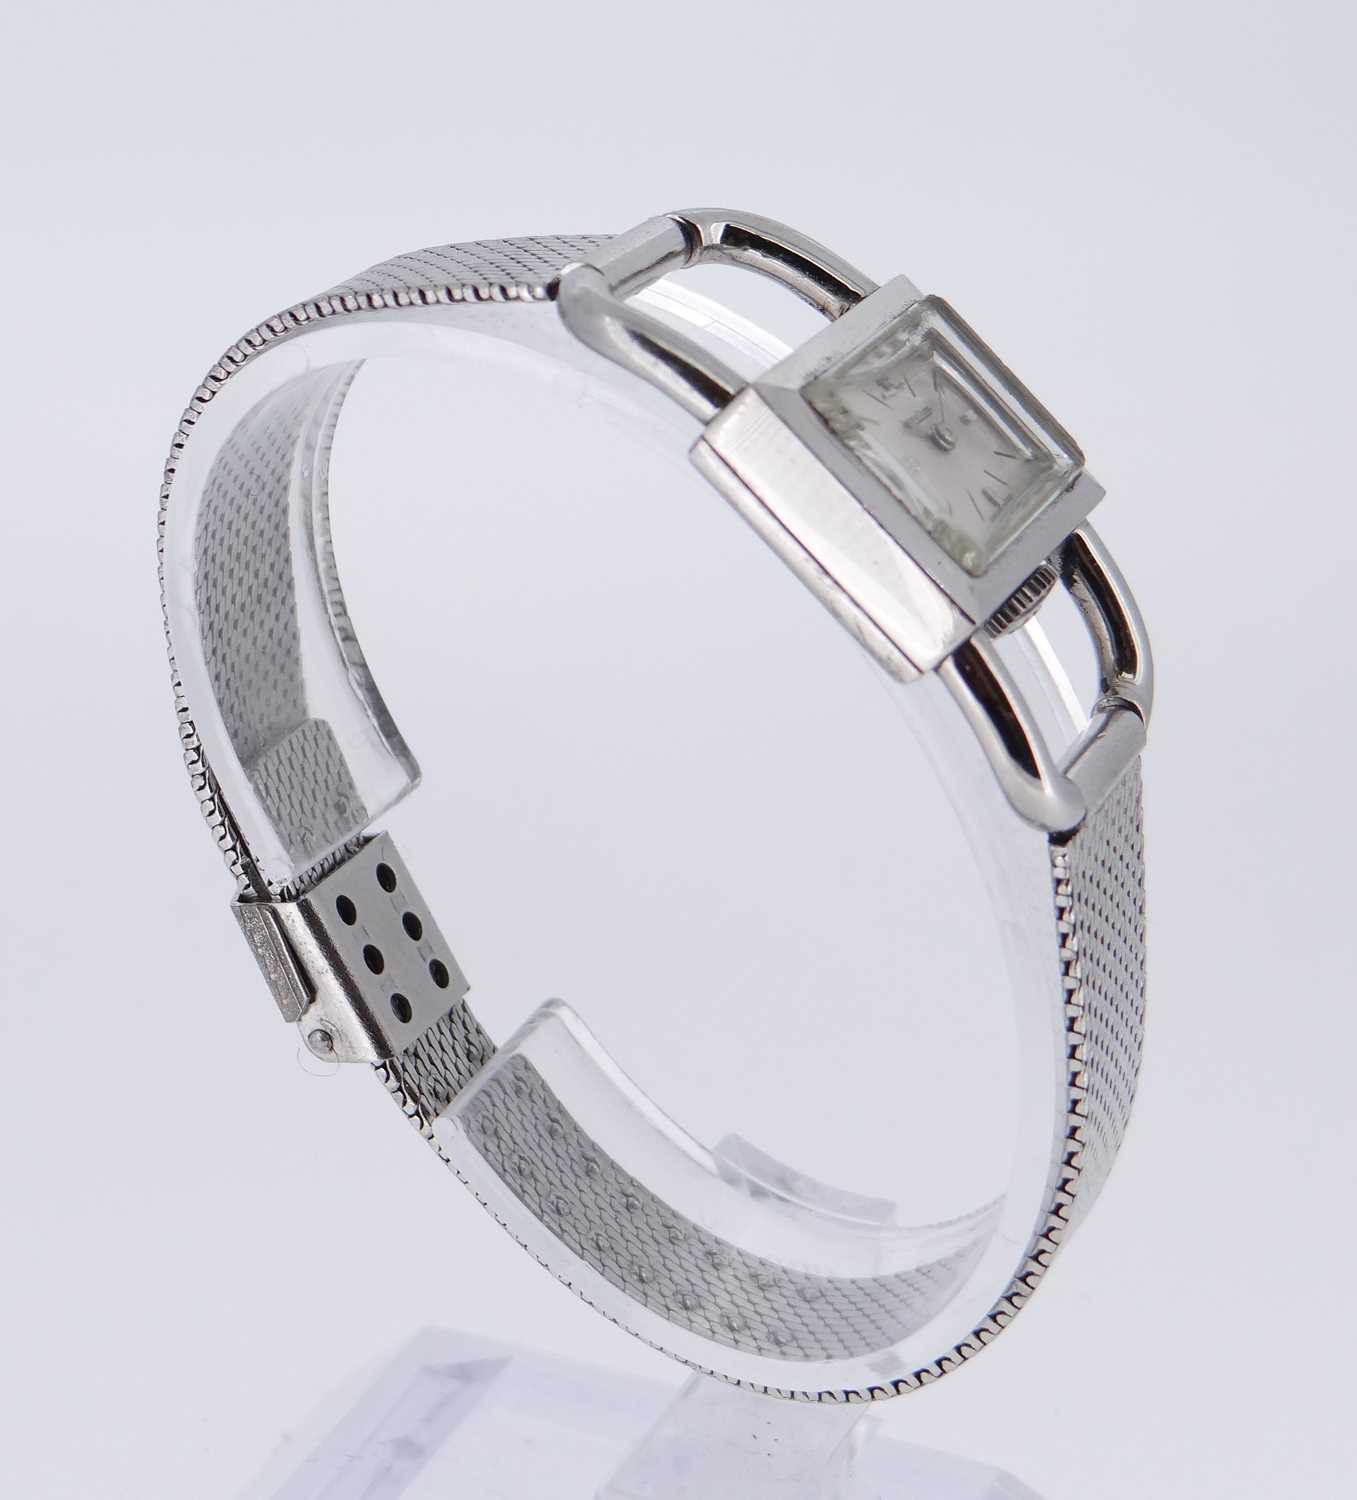 JAEGER LECOULTRE STAINLESS STEEL LADIES’ WRISTWATCH, c. 1965 - Image 2 of 6